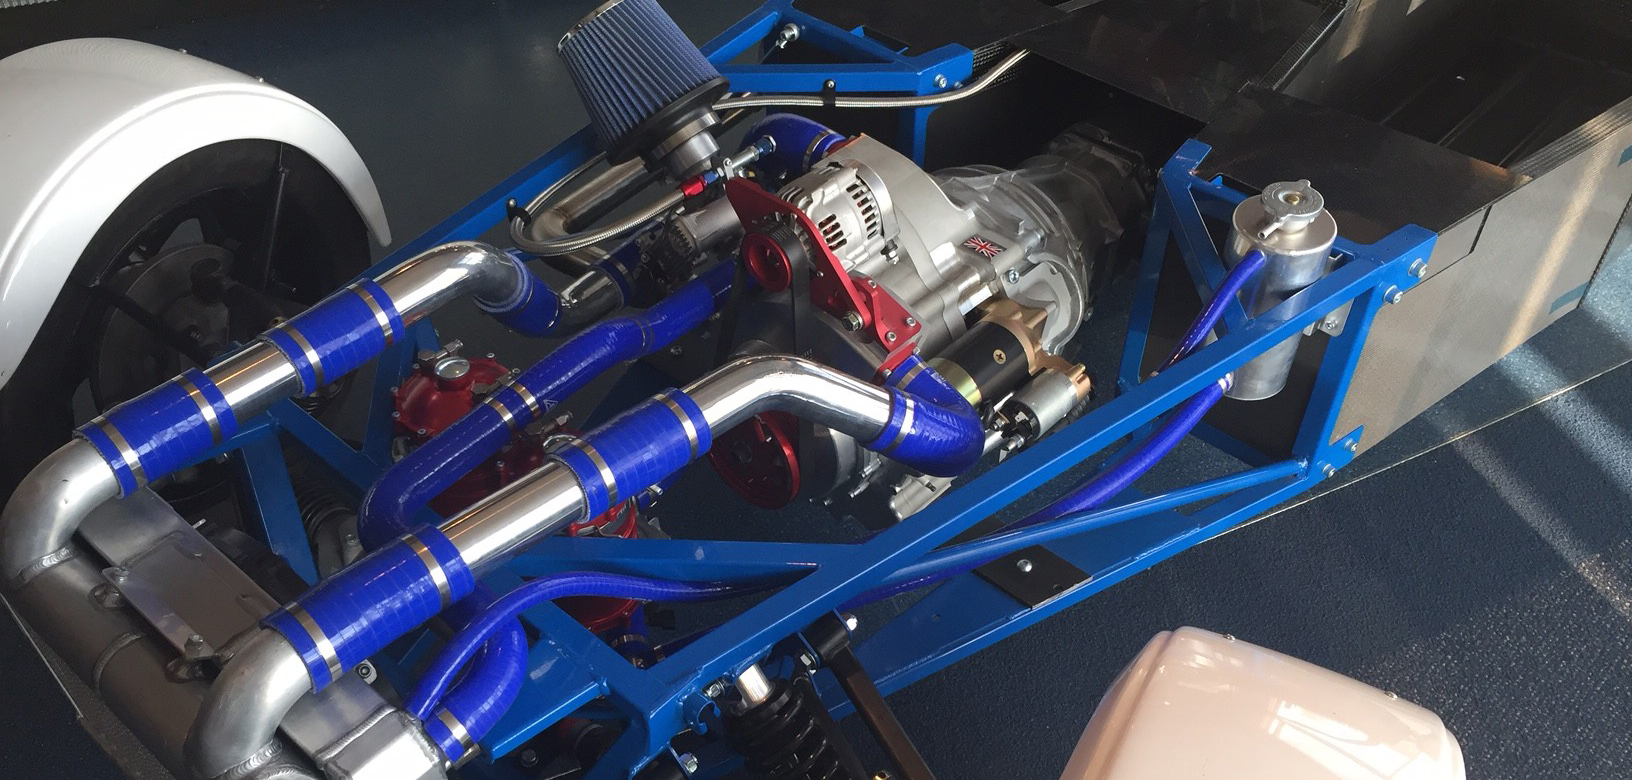 AIE’s 650S Wankel rotary engine in a Westfield blue frame